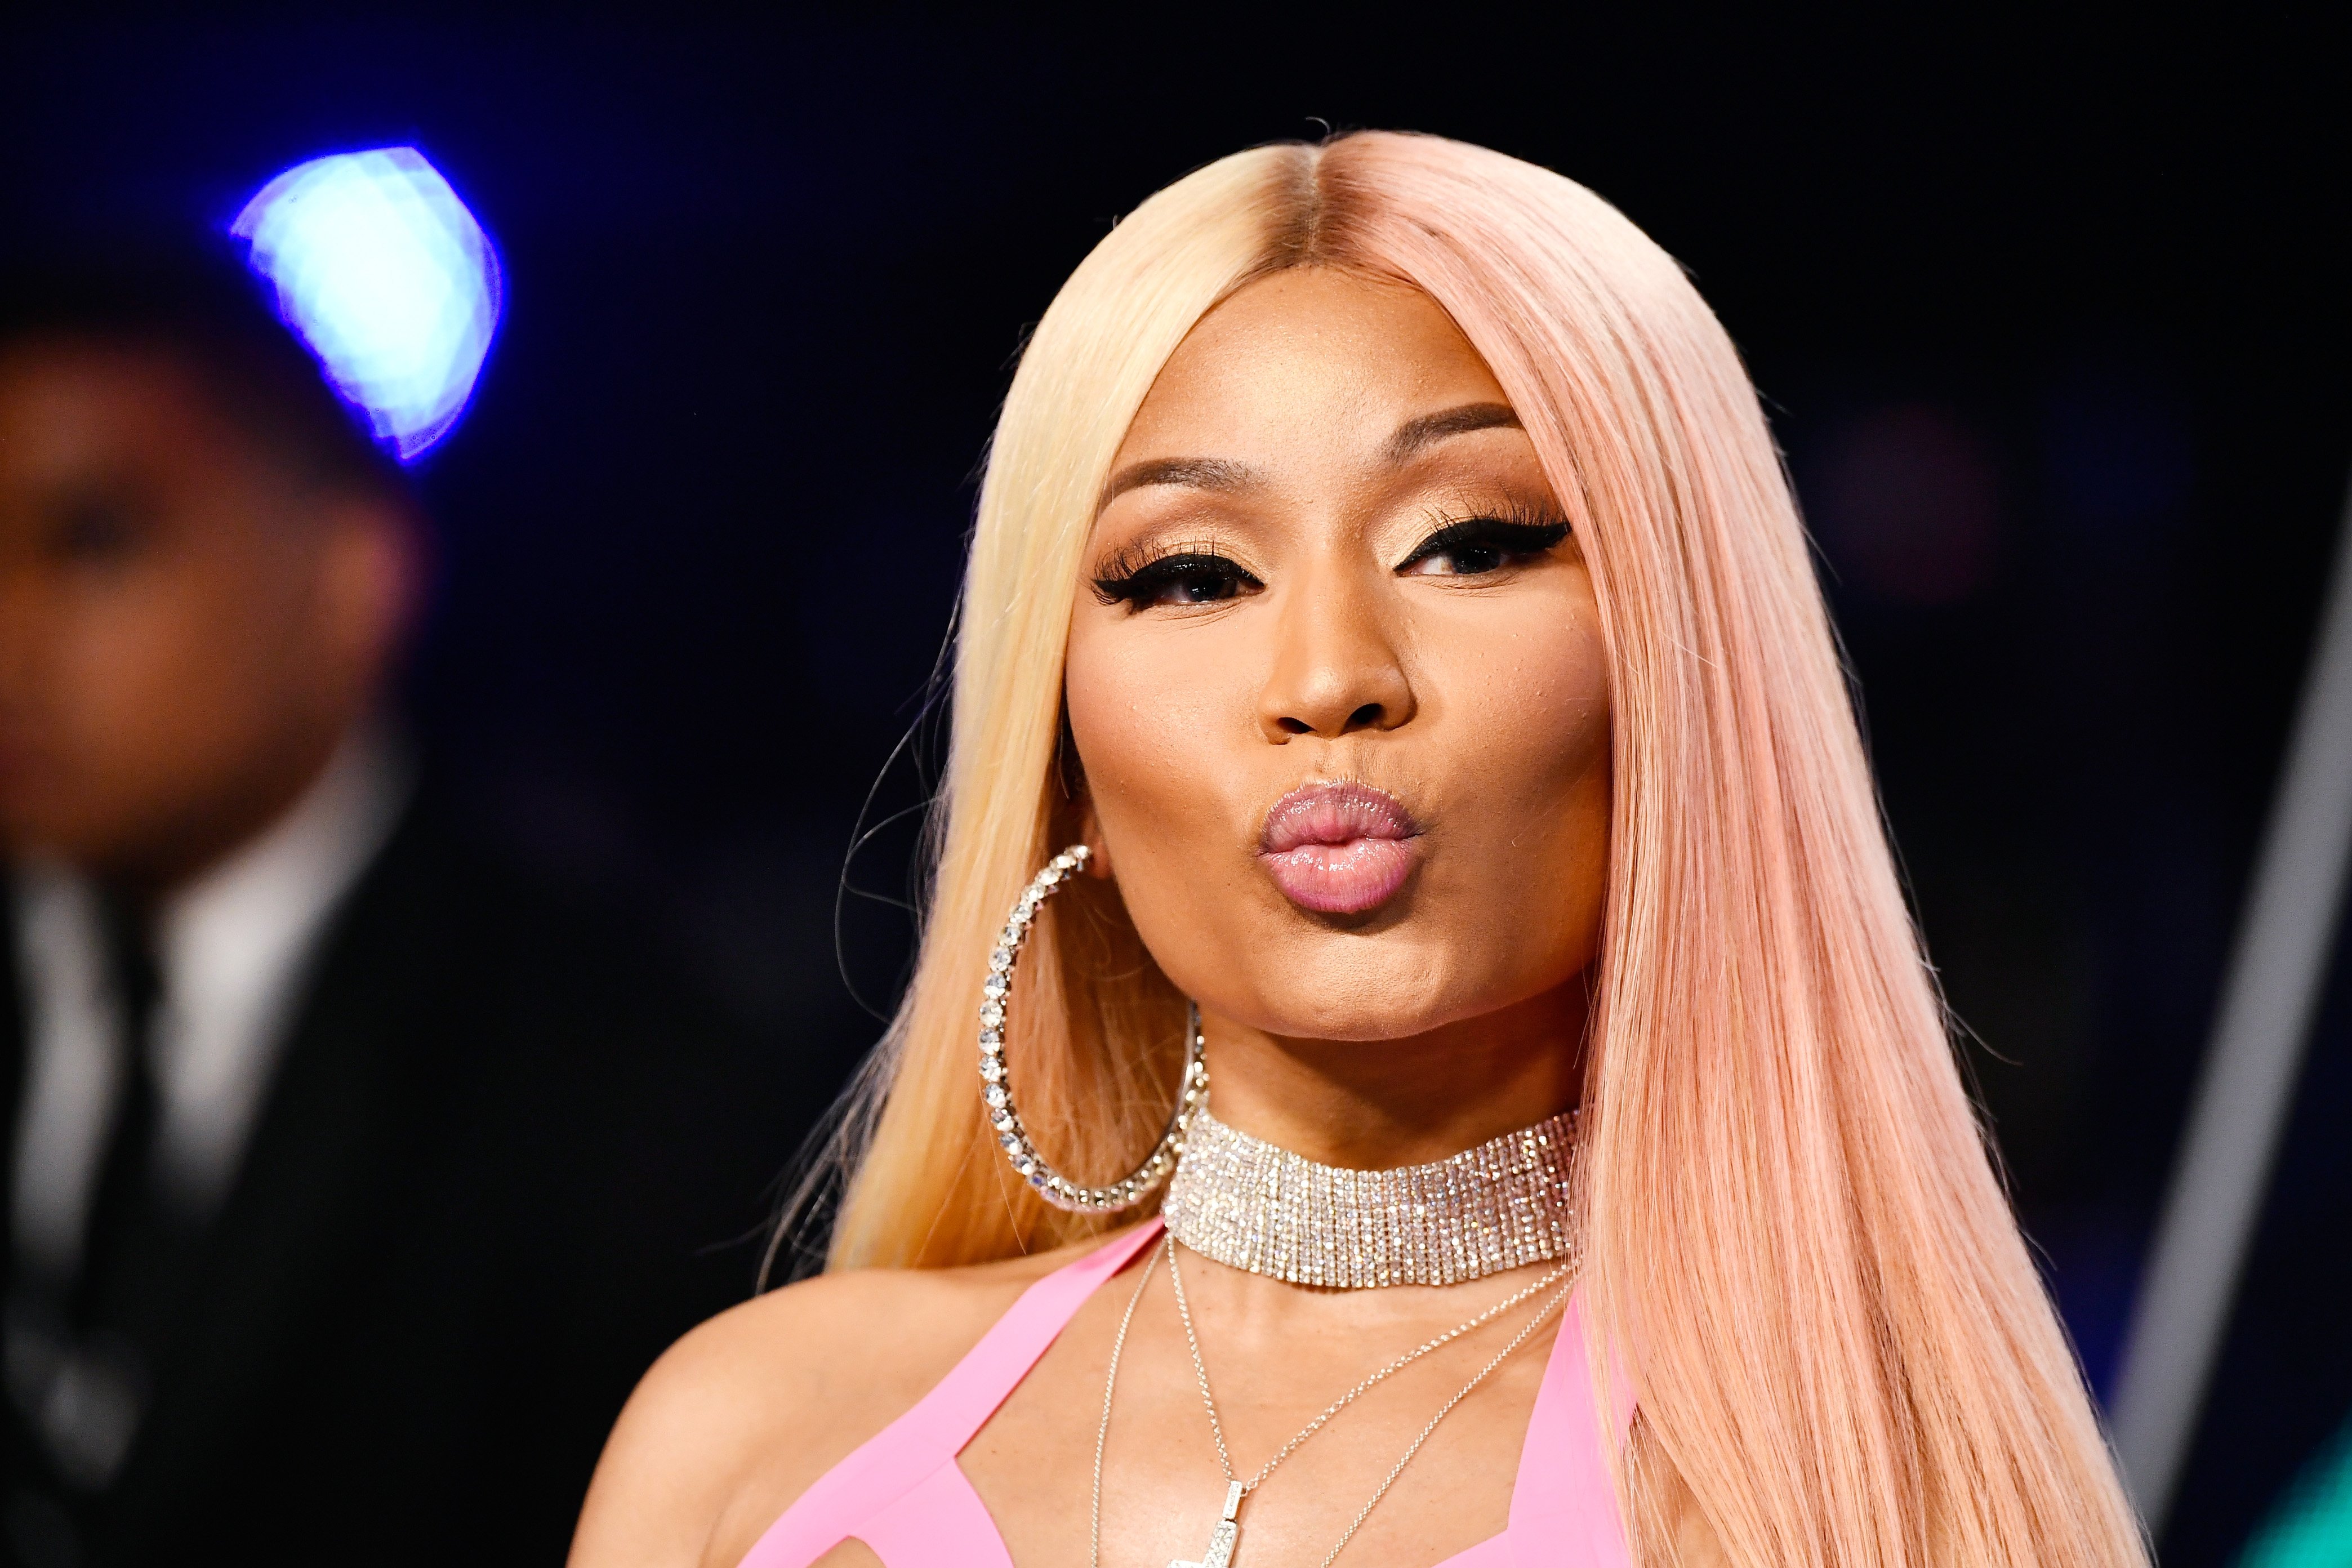 Nicki Minaj attends the 2017 MTV Video Music Awards at The Forum on August 27, 2017, in Inglewood, California. | Source: Getty Images